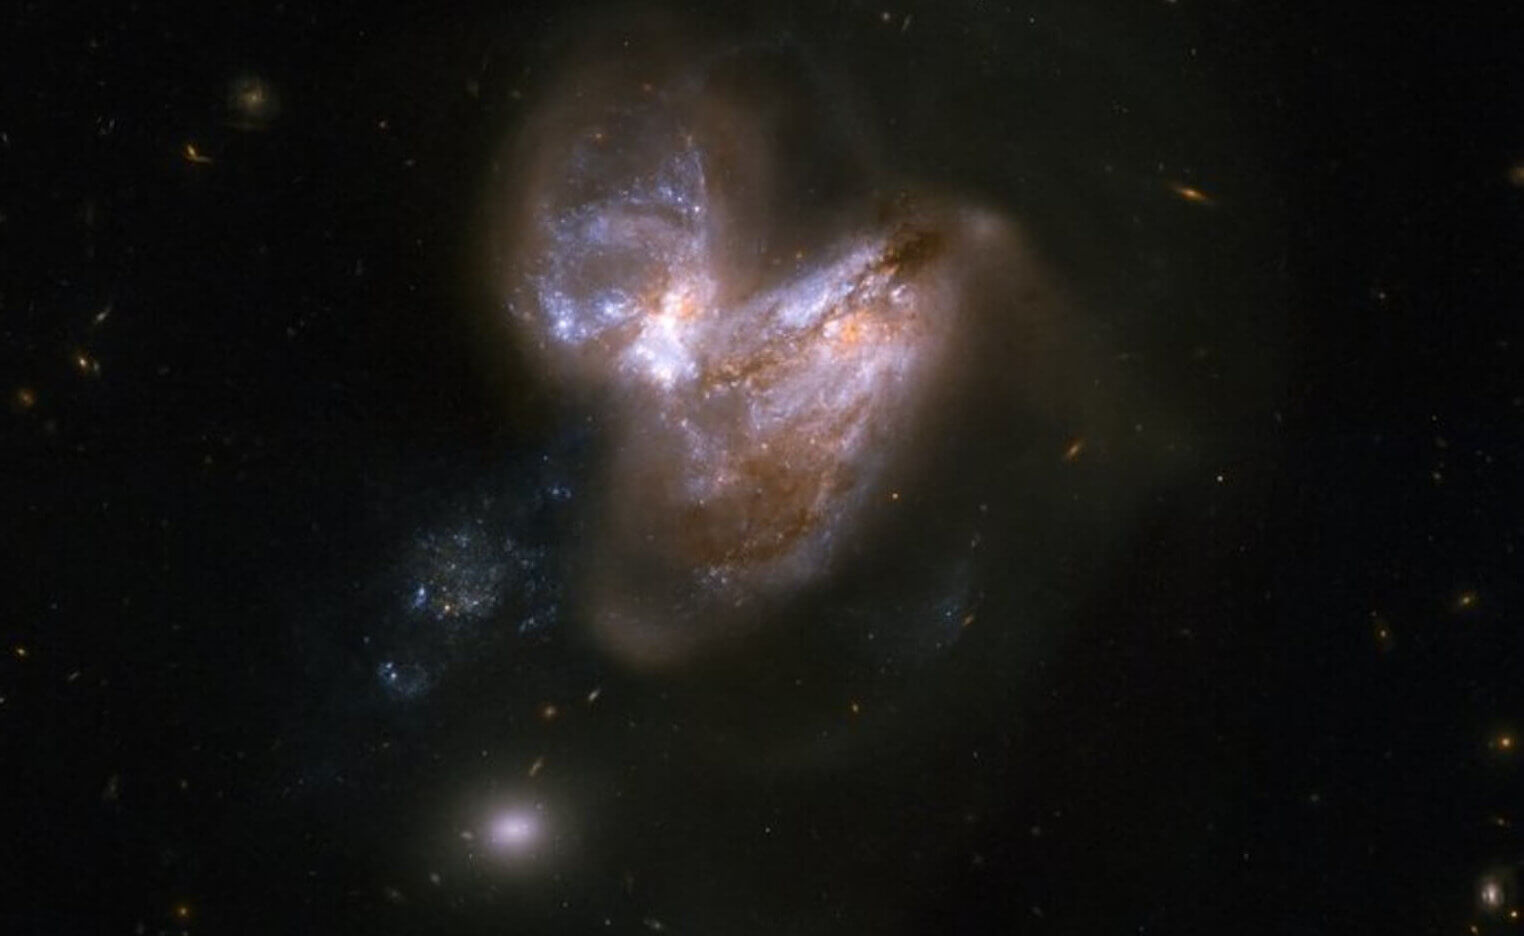 This system consists of a pair of galaxies, dubbed IC 694 and NGC 3690